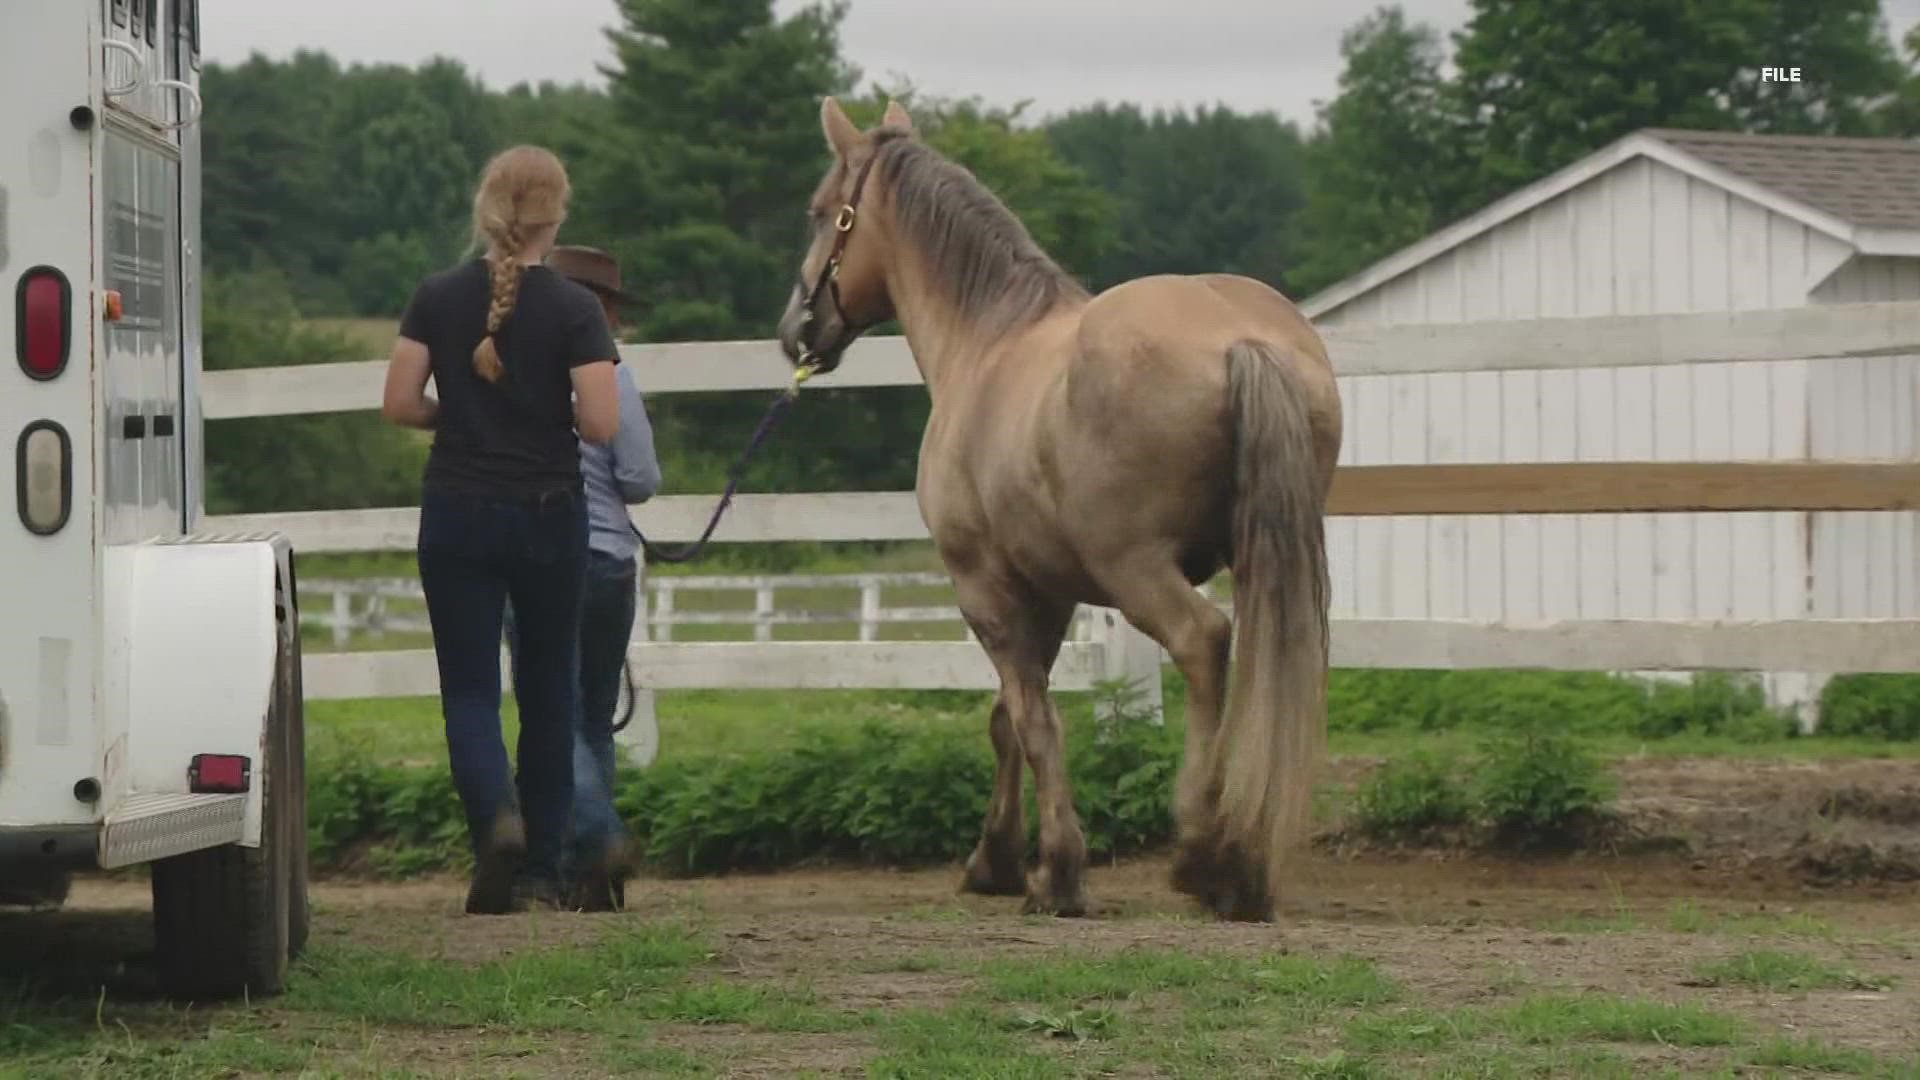 Jessica Pechtel, who with her husband owned 20 neglected horses seized in Springvale in July 2021, pleaded guilty to embezzling nearly $600,000 from her employer.